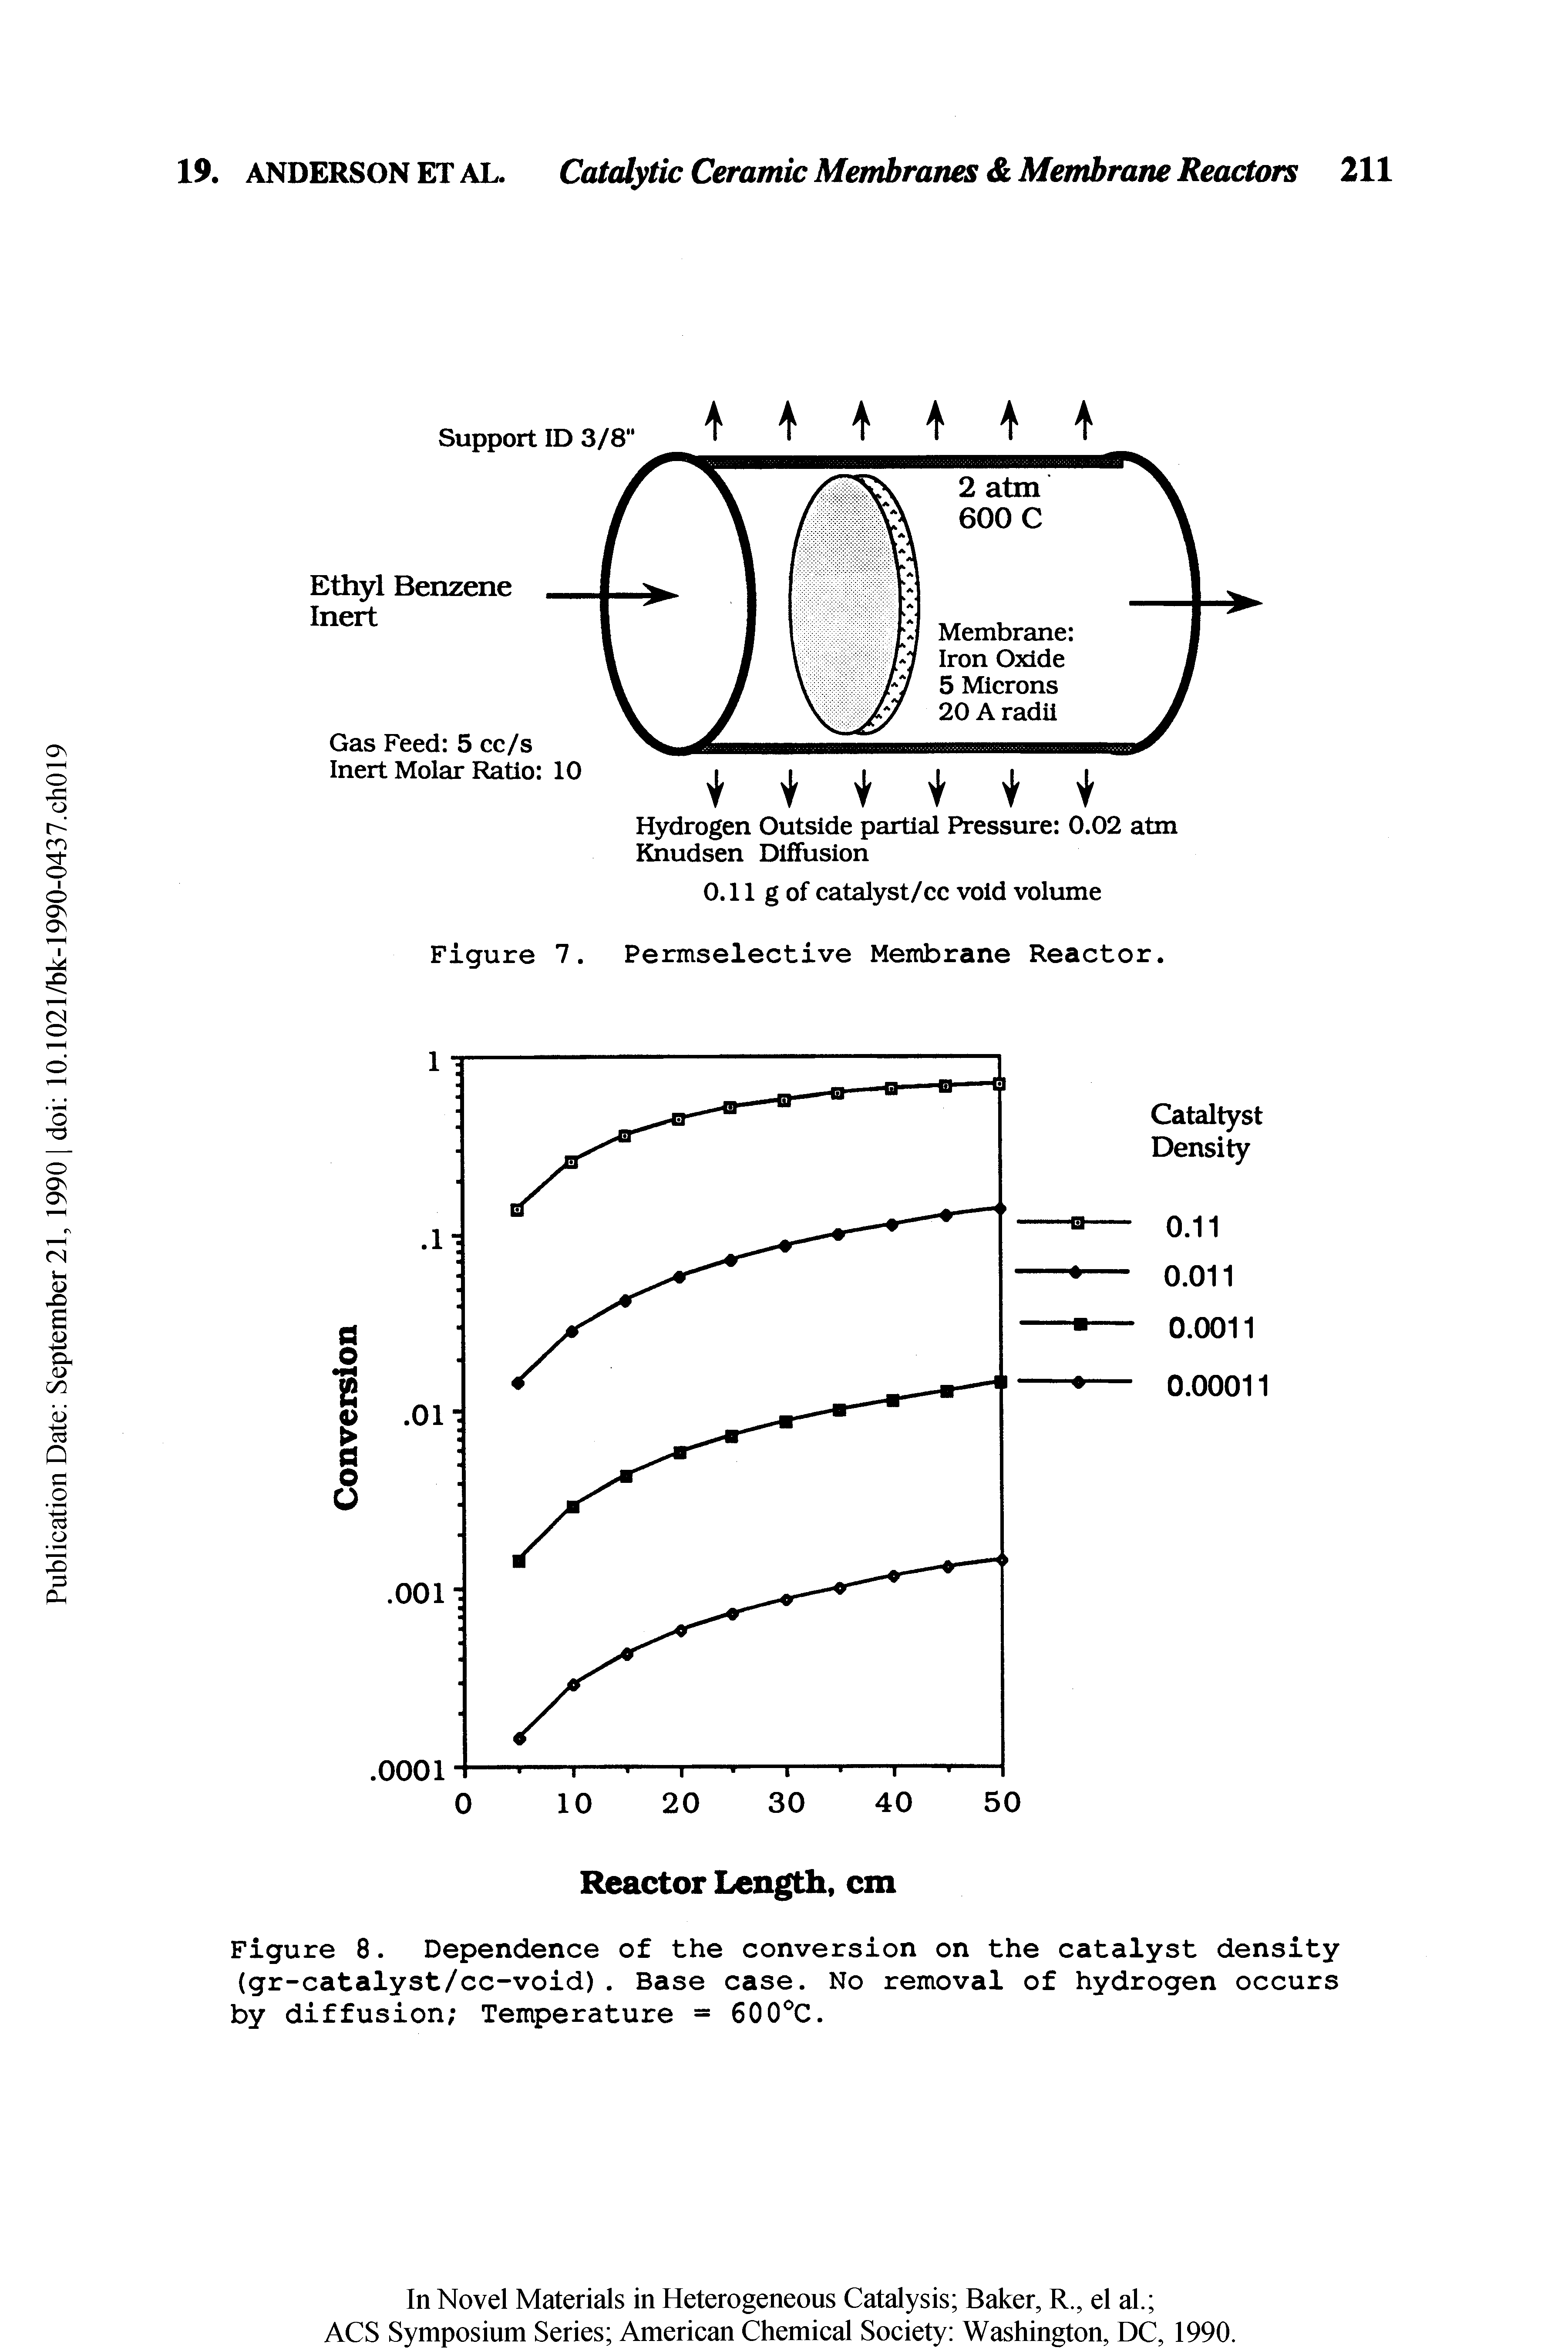 Figure 8. Dependence of the conversion on the catalyst density (gr-catalyst/cc-void). Base case. No removal of hydrogen occurs by diffusion Temperature = 600°C.